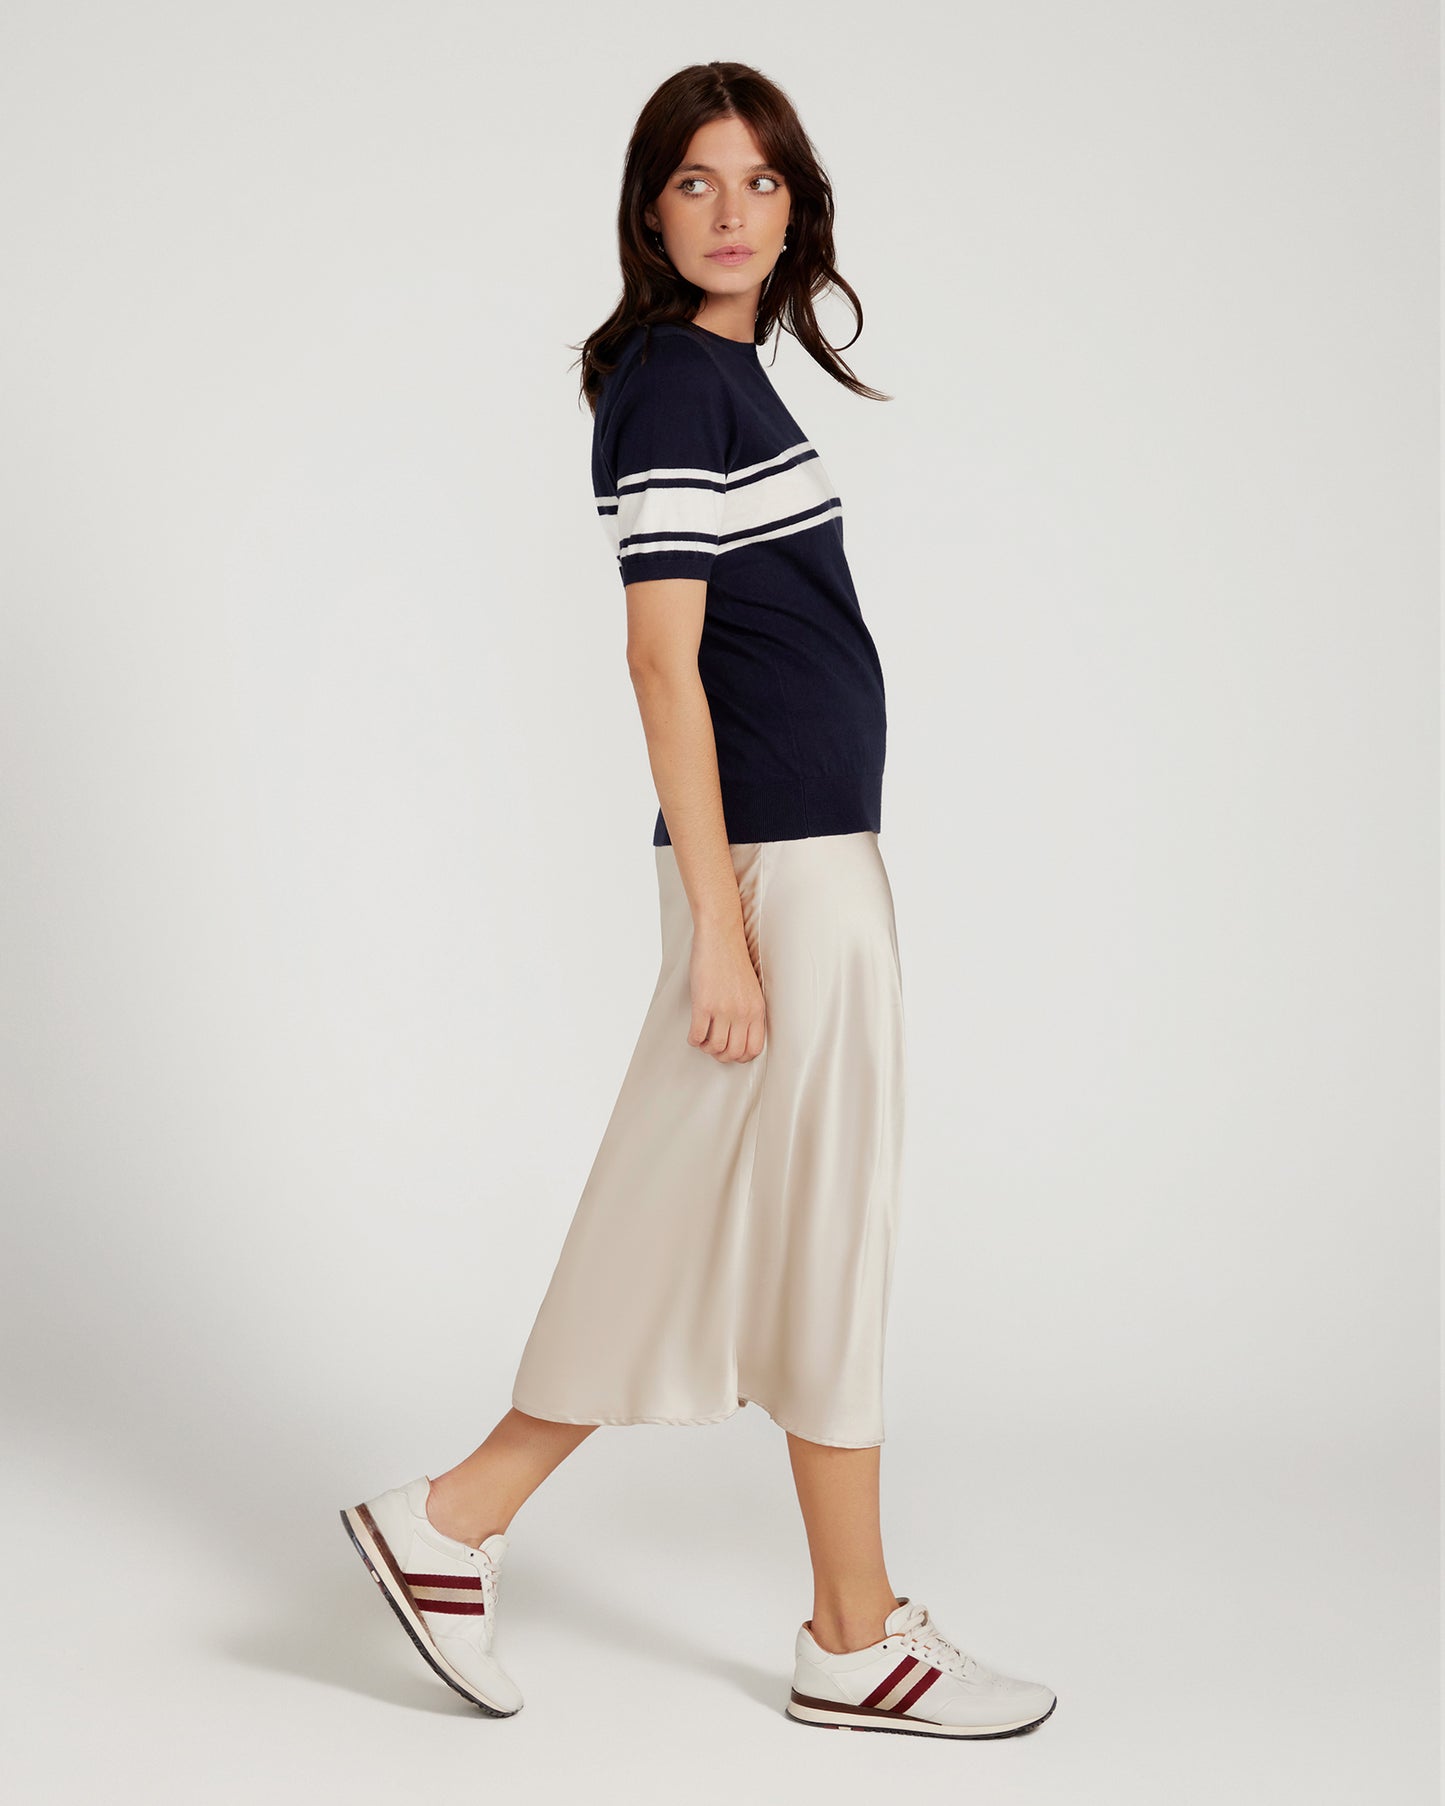 Cotton And Cashmere Crewneck Navy Top With Ivory Stripe